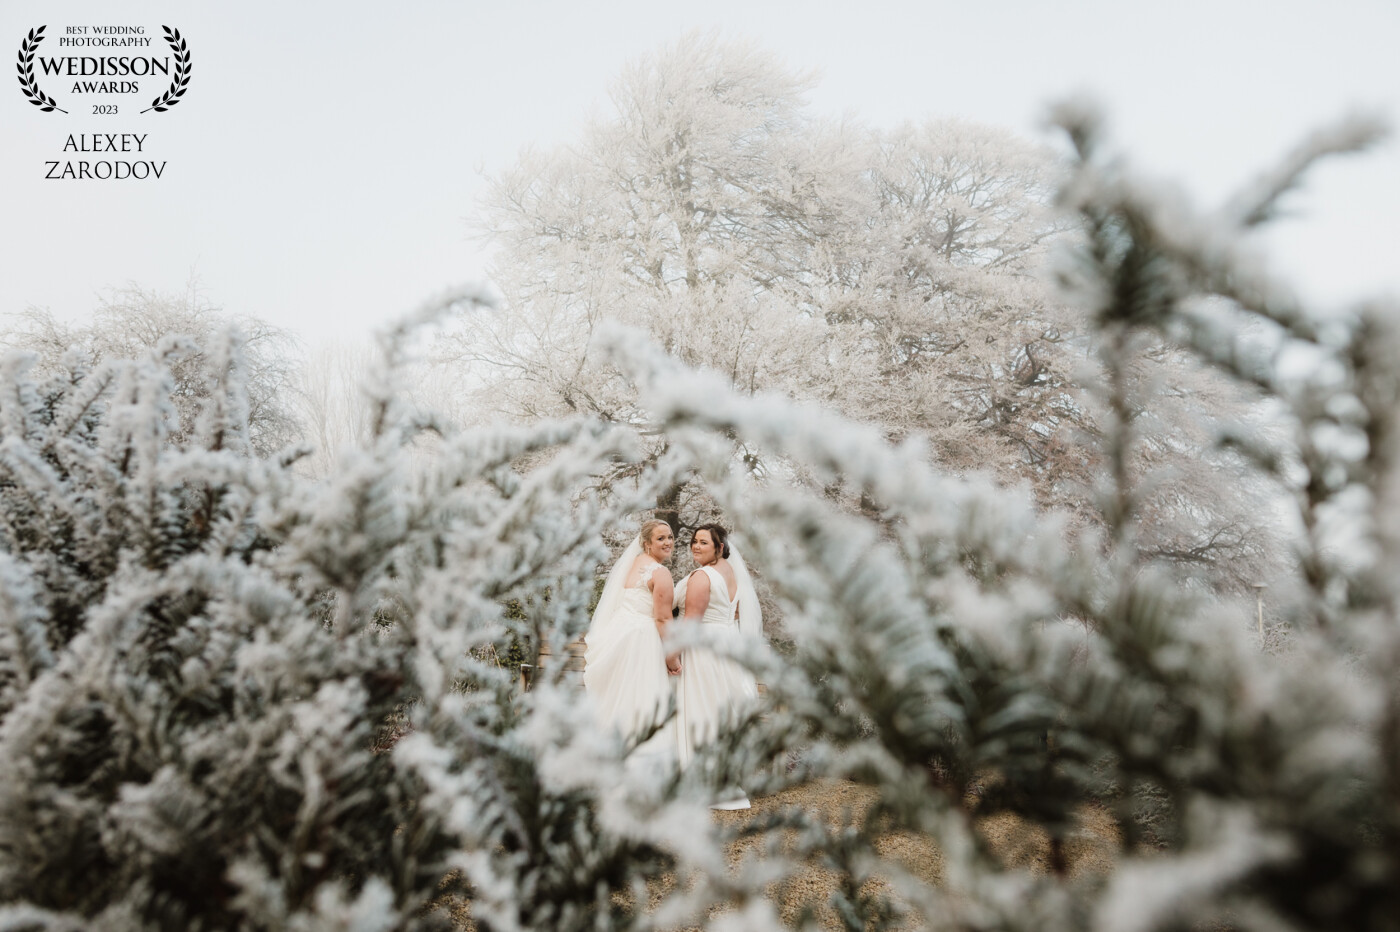 Catherine & Mary’s Winter wonderland Wedding at Raheen Woods Hotel, Athenry, Galway. Not a usual weather conditions for Ireland.